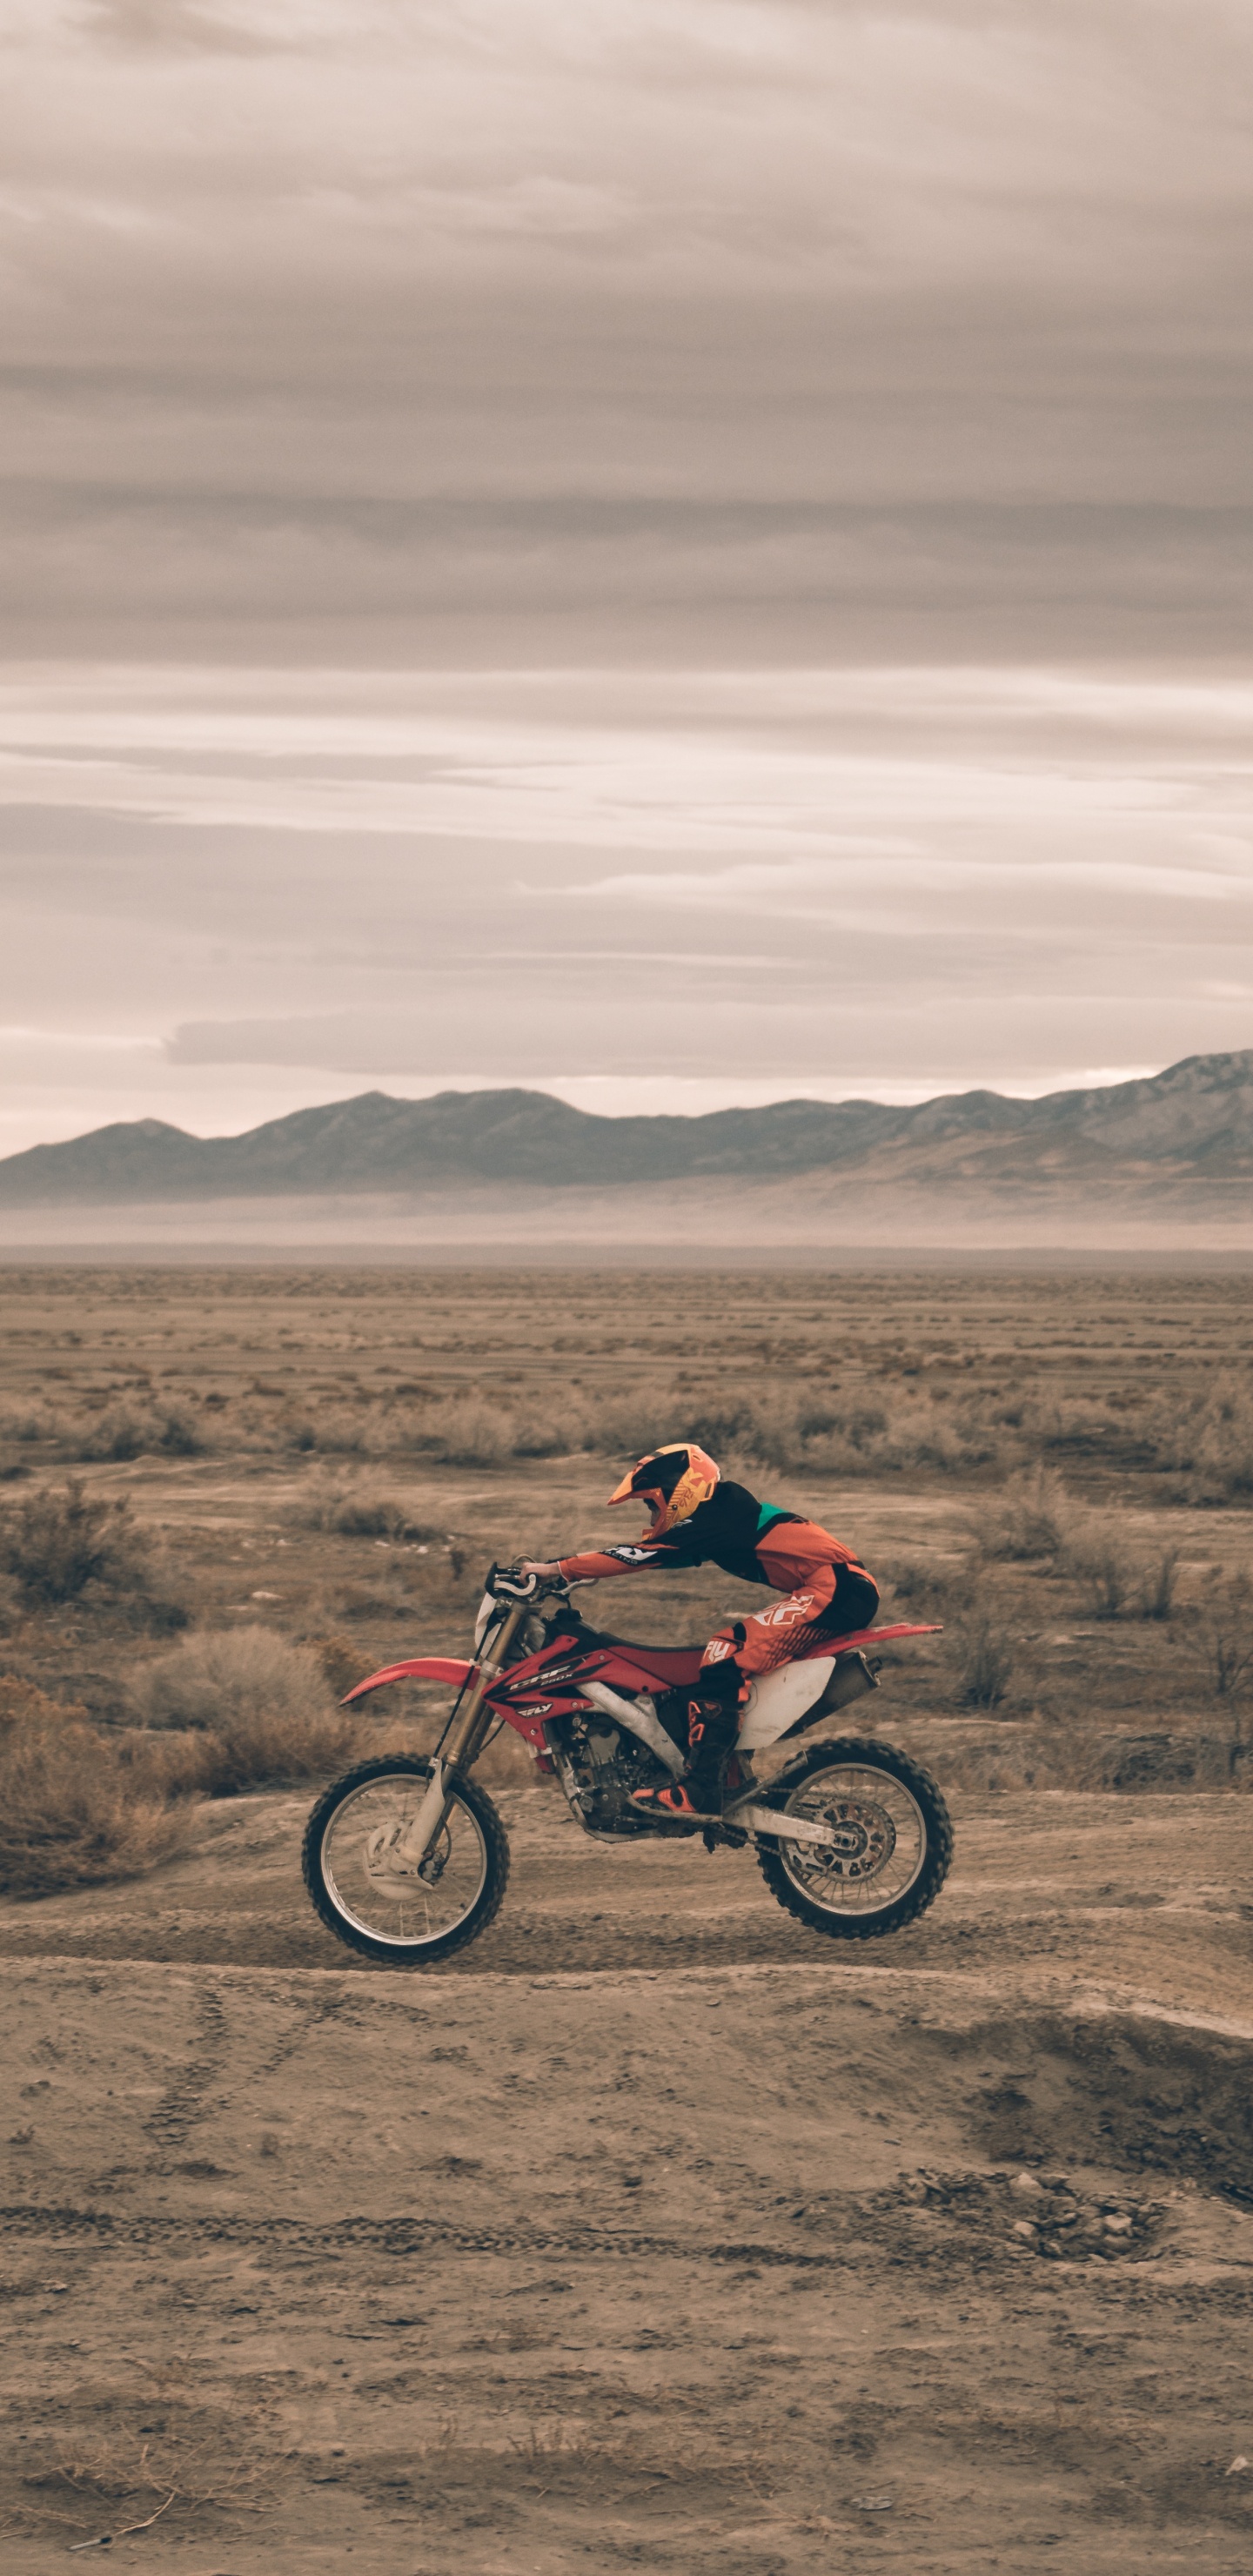 Man in Red Jacket Riding on Red Motorcycle on Brown Field During Daytime. Wallpaper in 1440x2960 Resolution